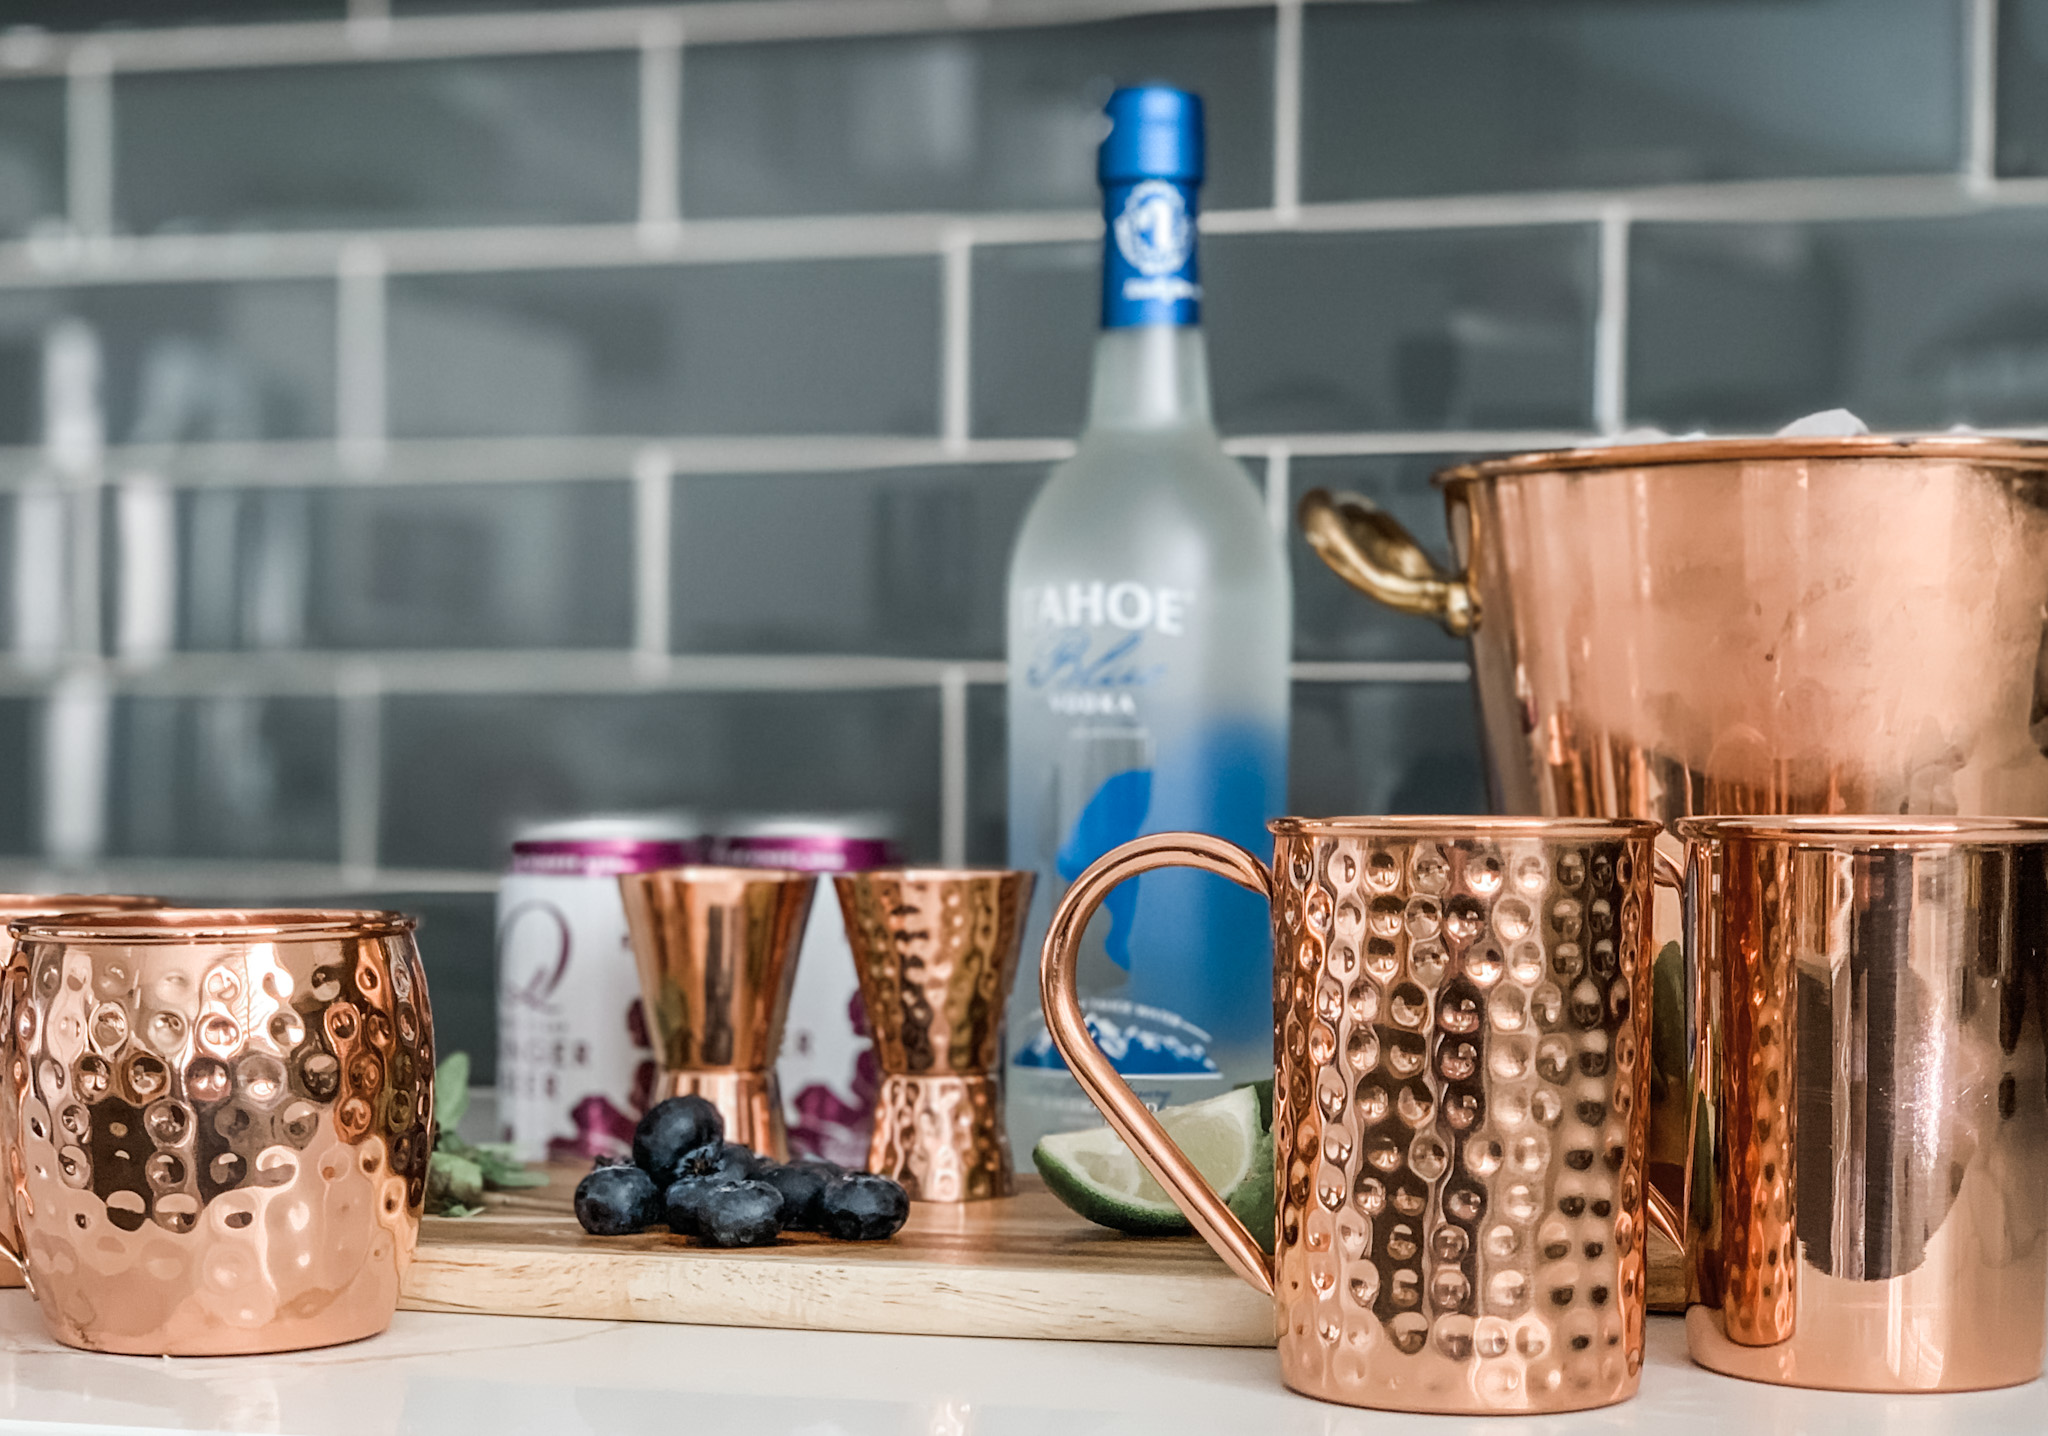 100% Pure Copper Hammered Copper Moscow Mule Cups Mug Bottle Free Shipping New 